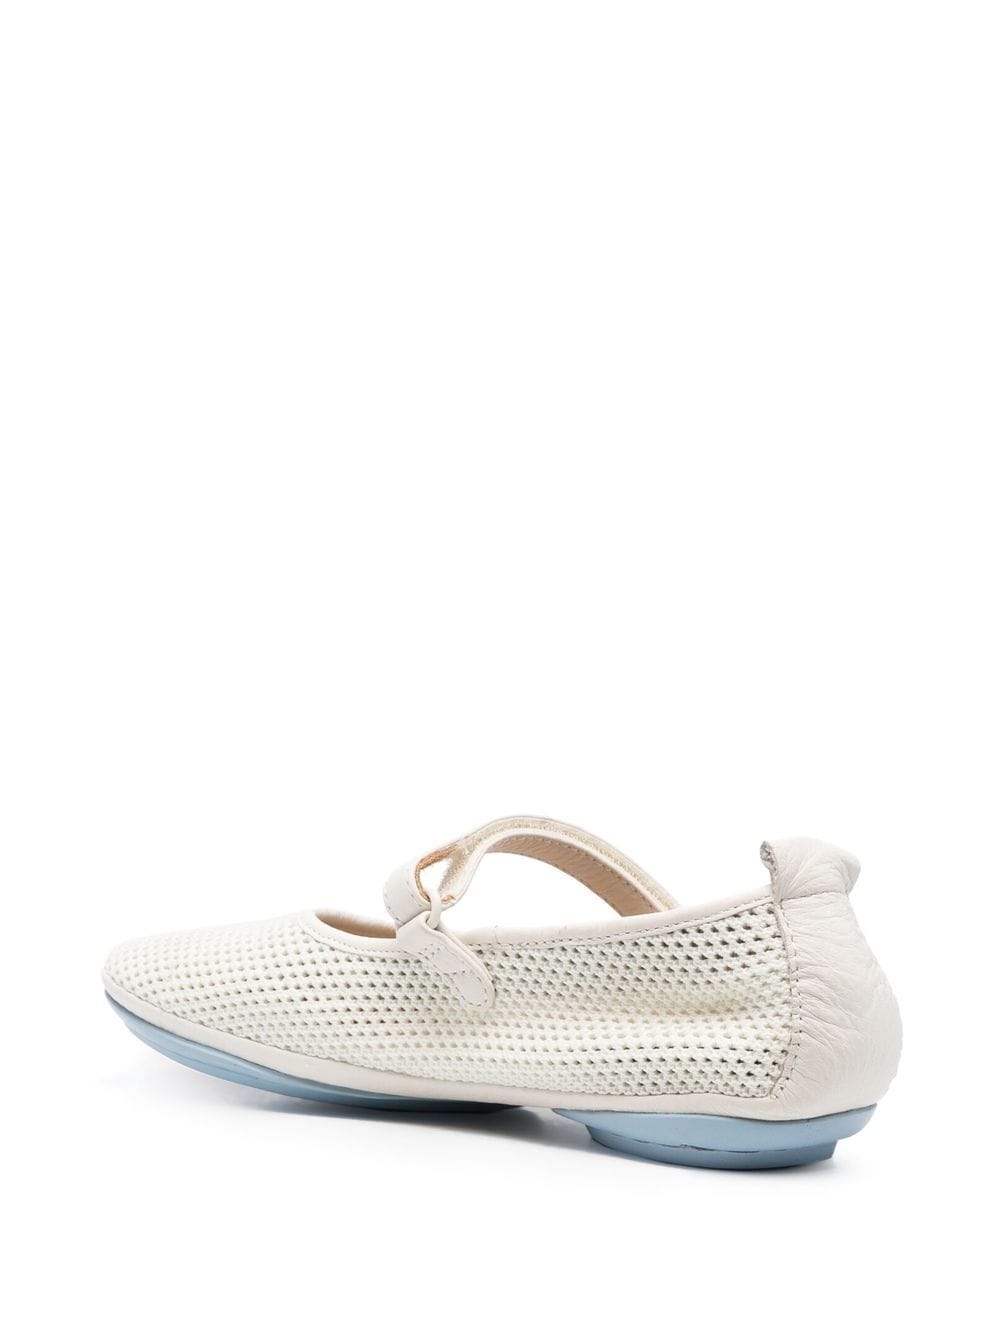 Camper Right Nina Perforated Mary Jane Flat In Ivory | ModeSens